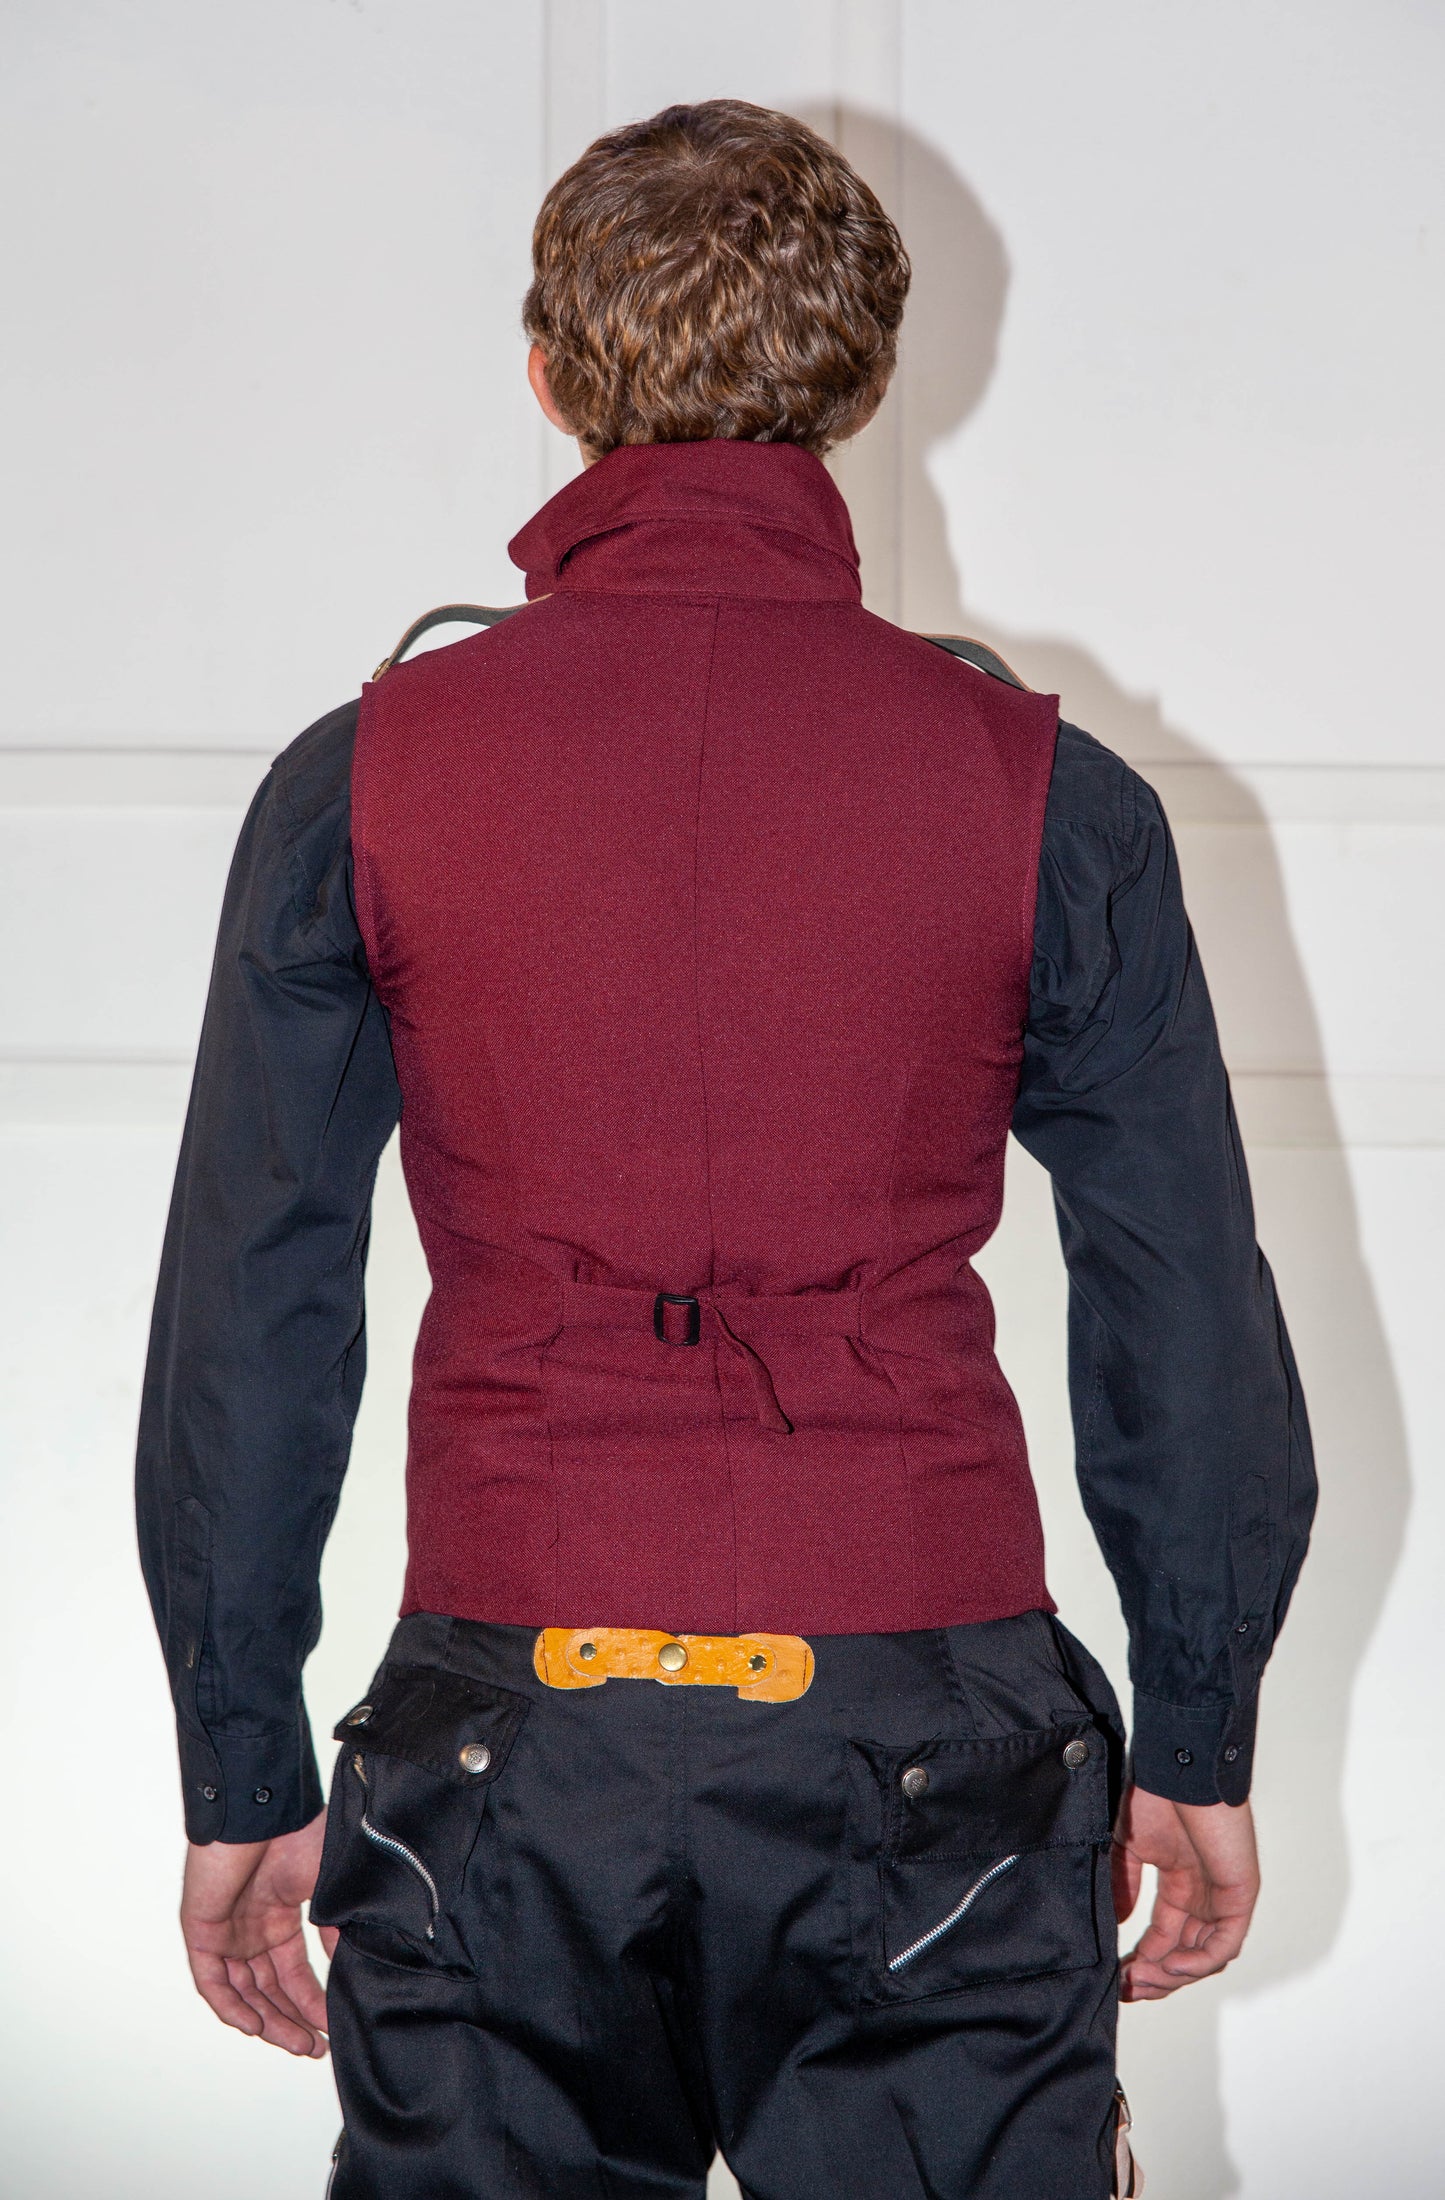 Waistcoat - Red with Leather Straps